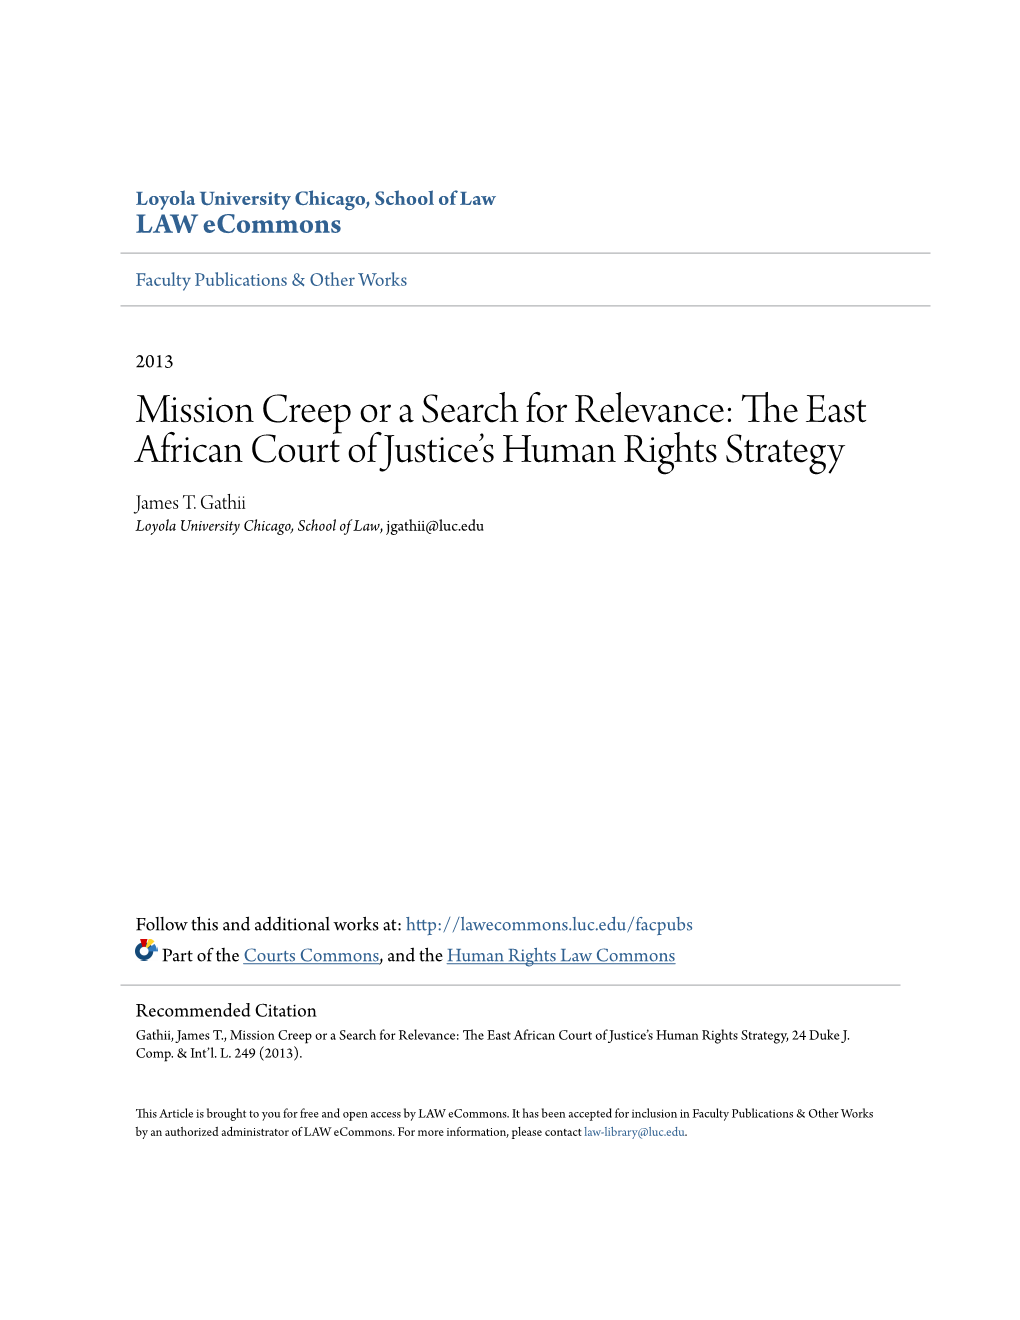 Mission Creep Or a Search for Relevance: the Ae St African Court of Justice’S Human Rights Strategy James T